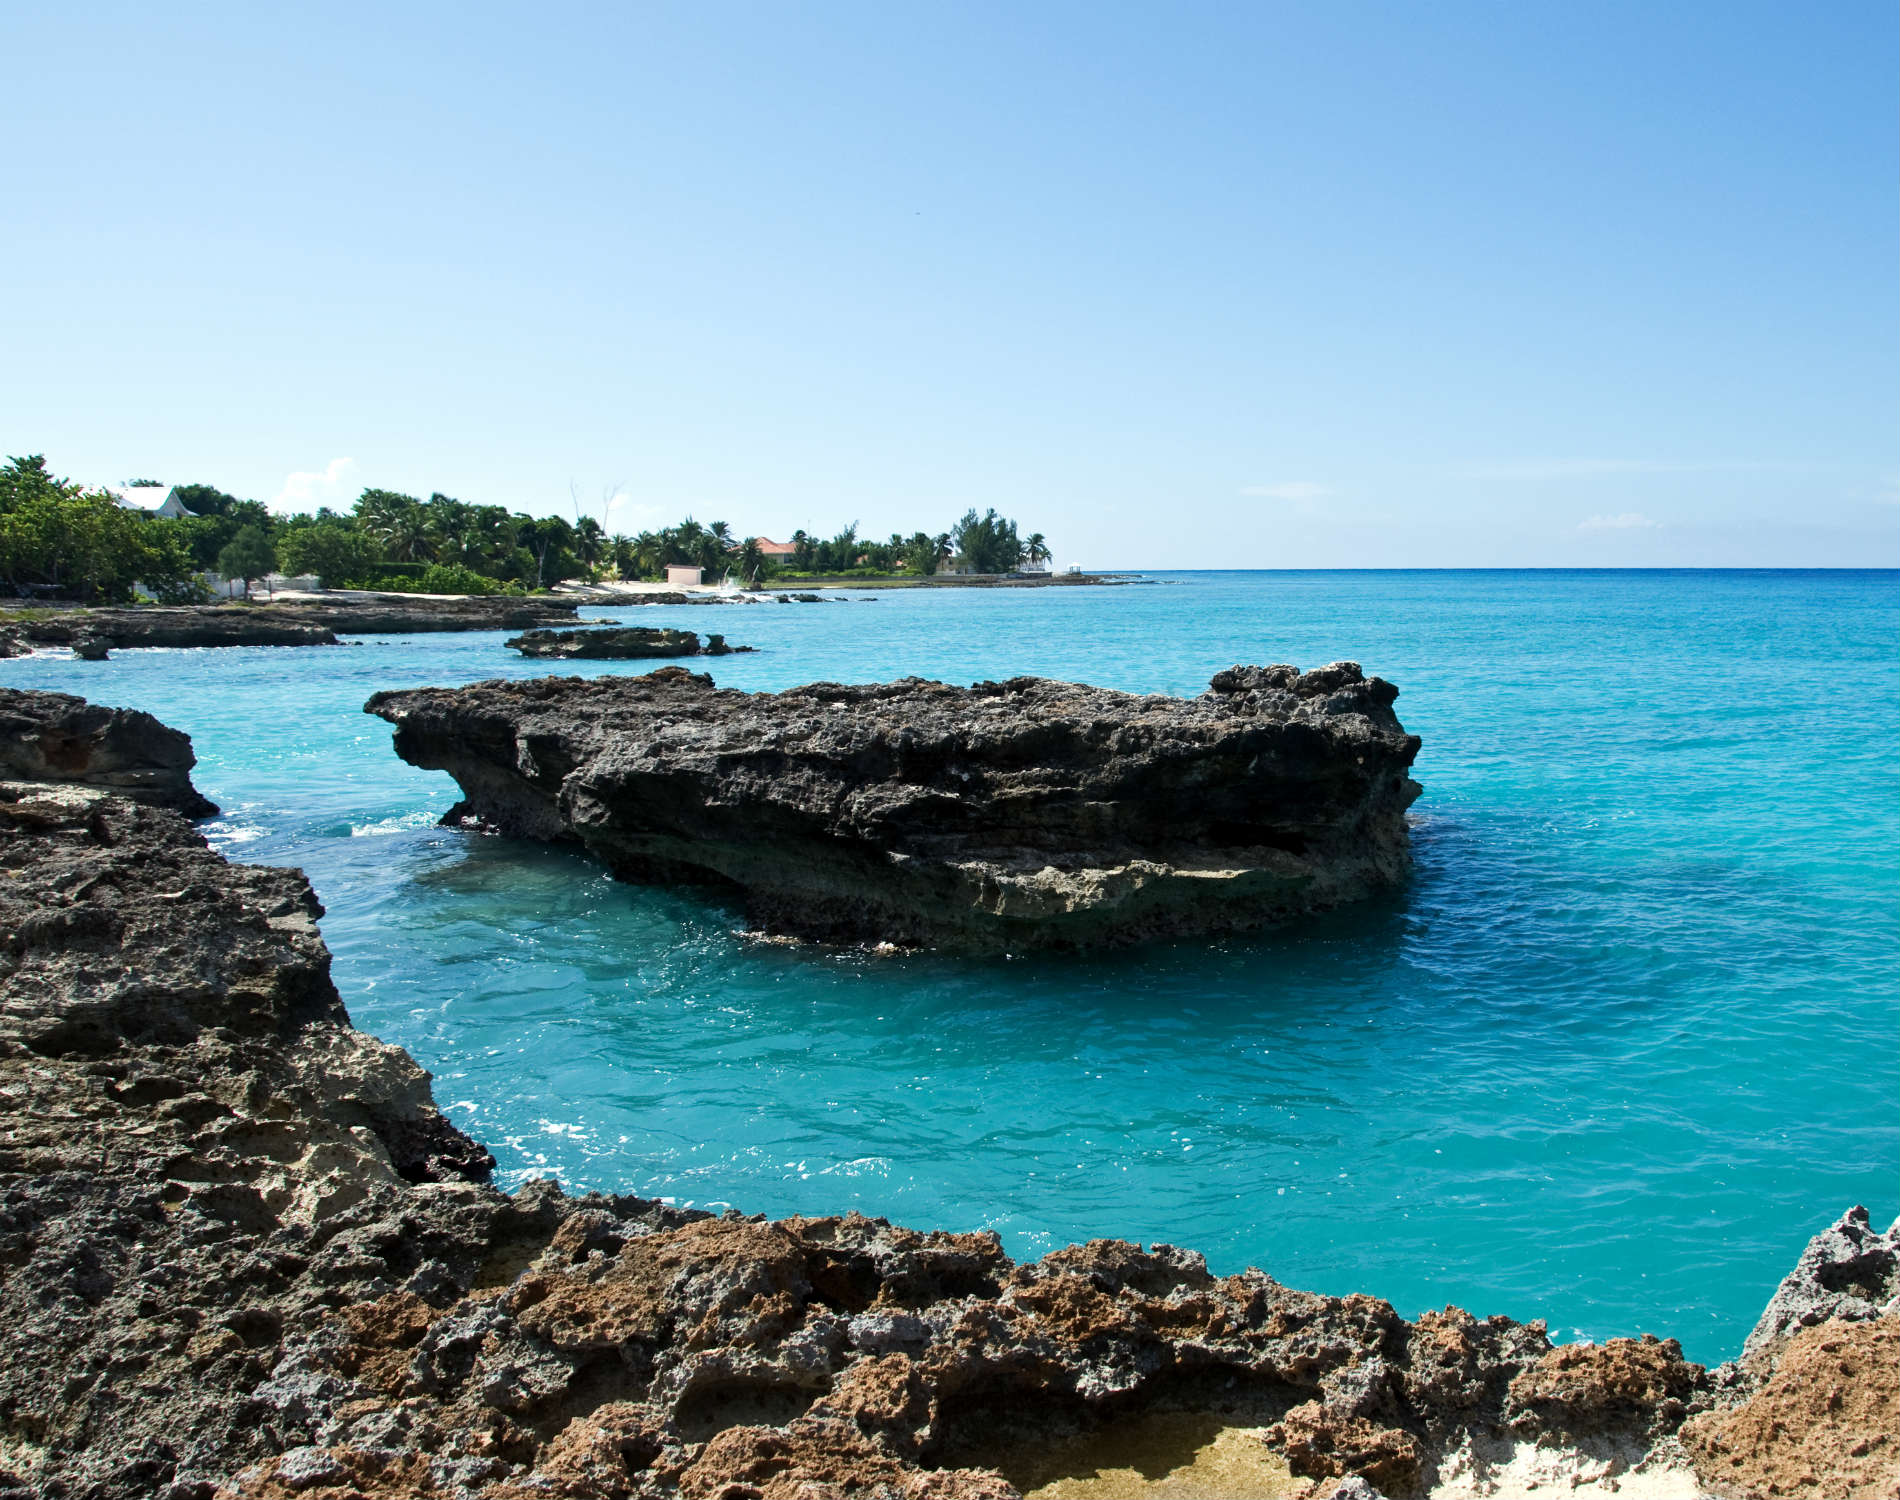 The Best Time to Visit the Cayman Islands